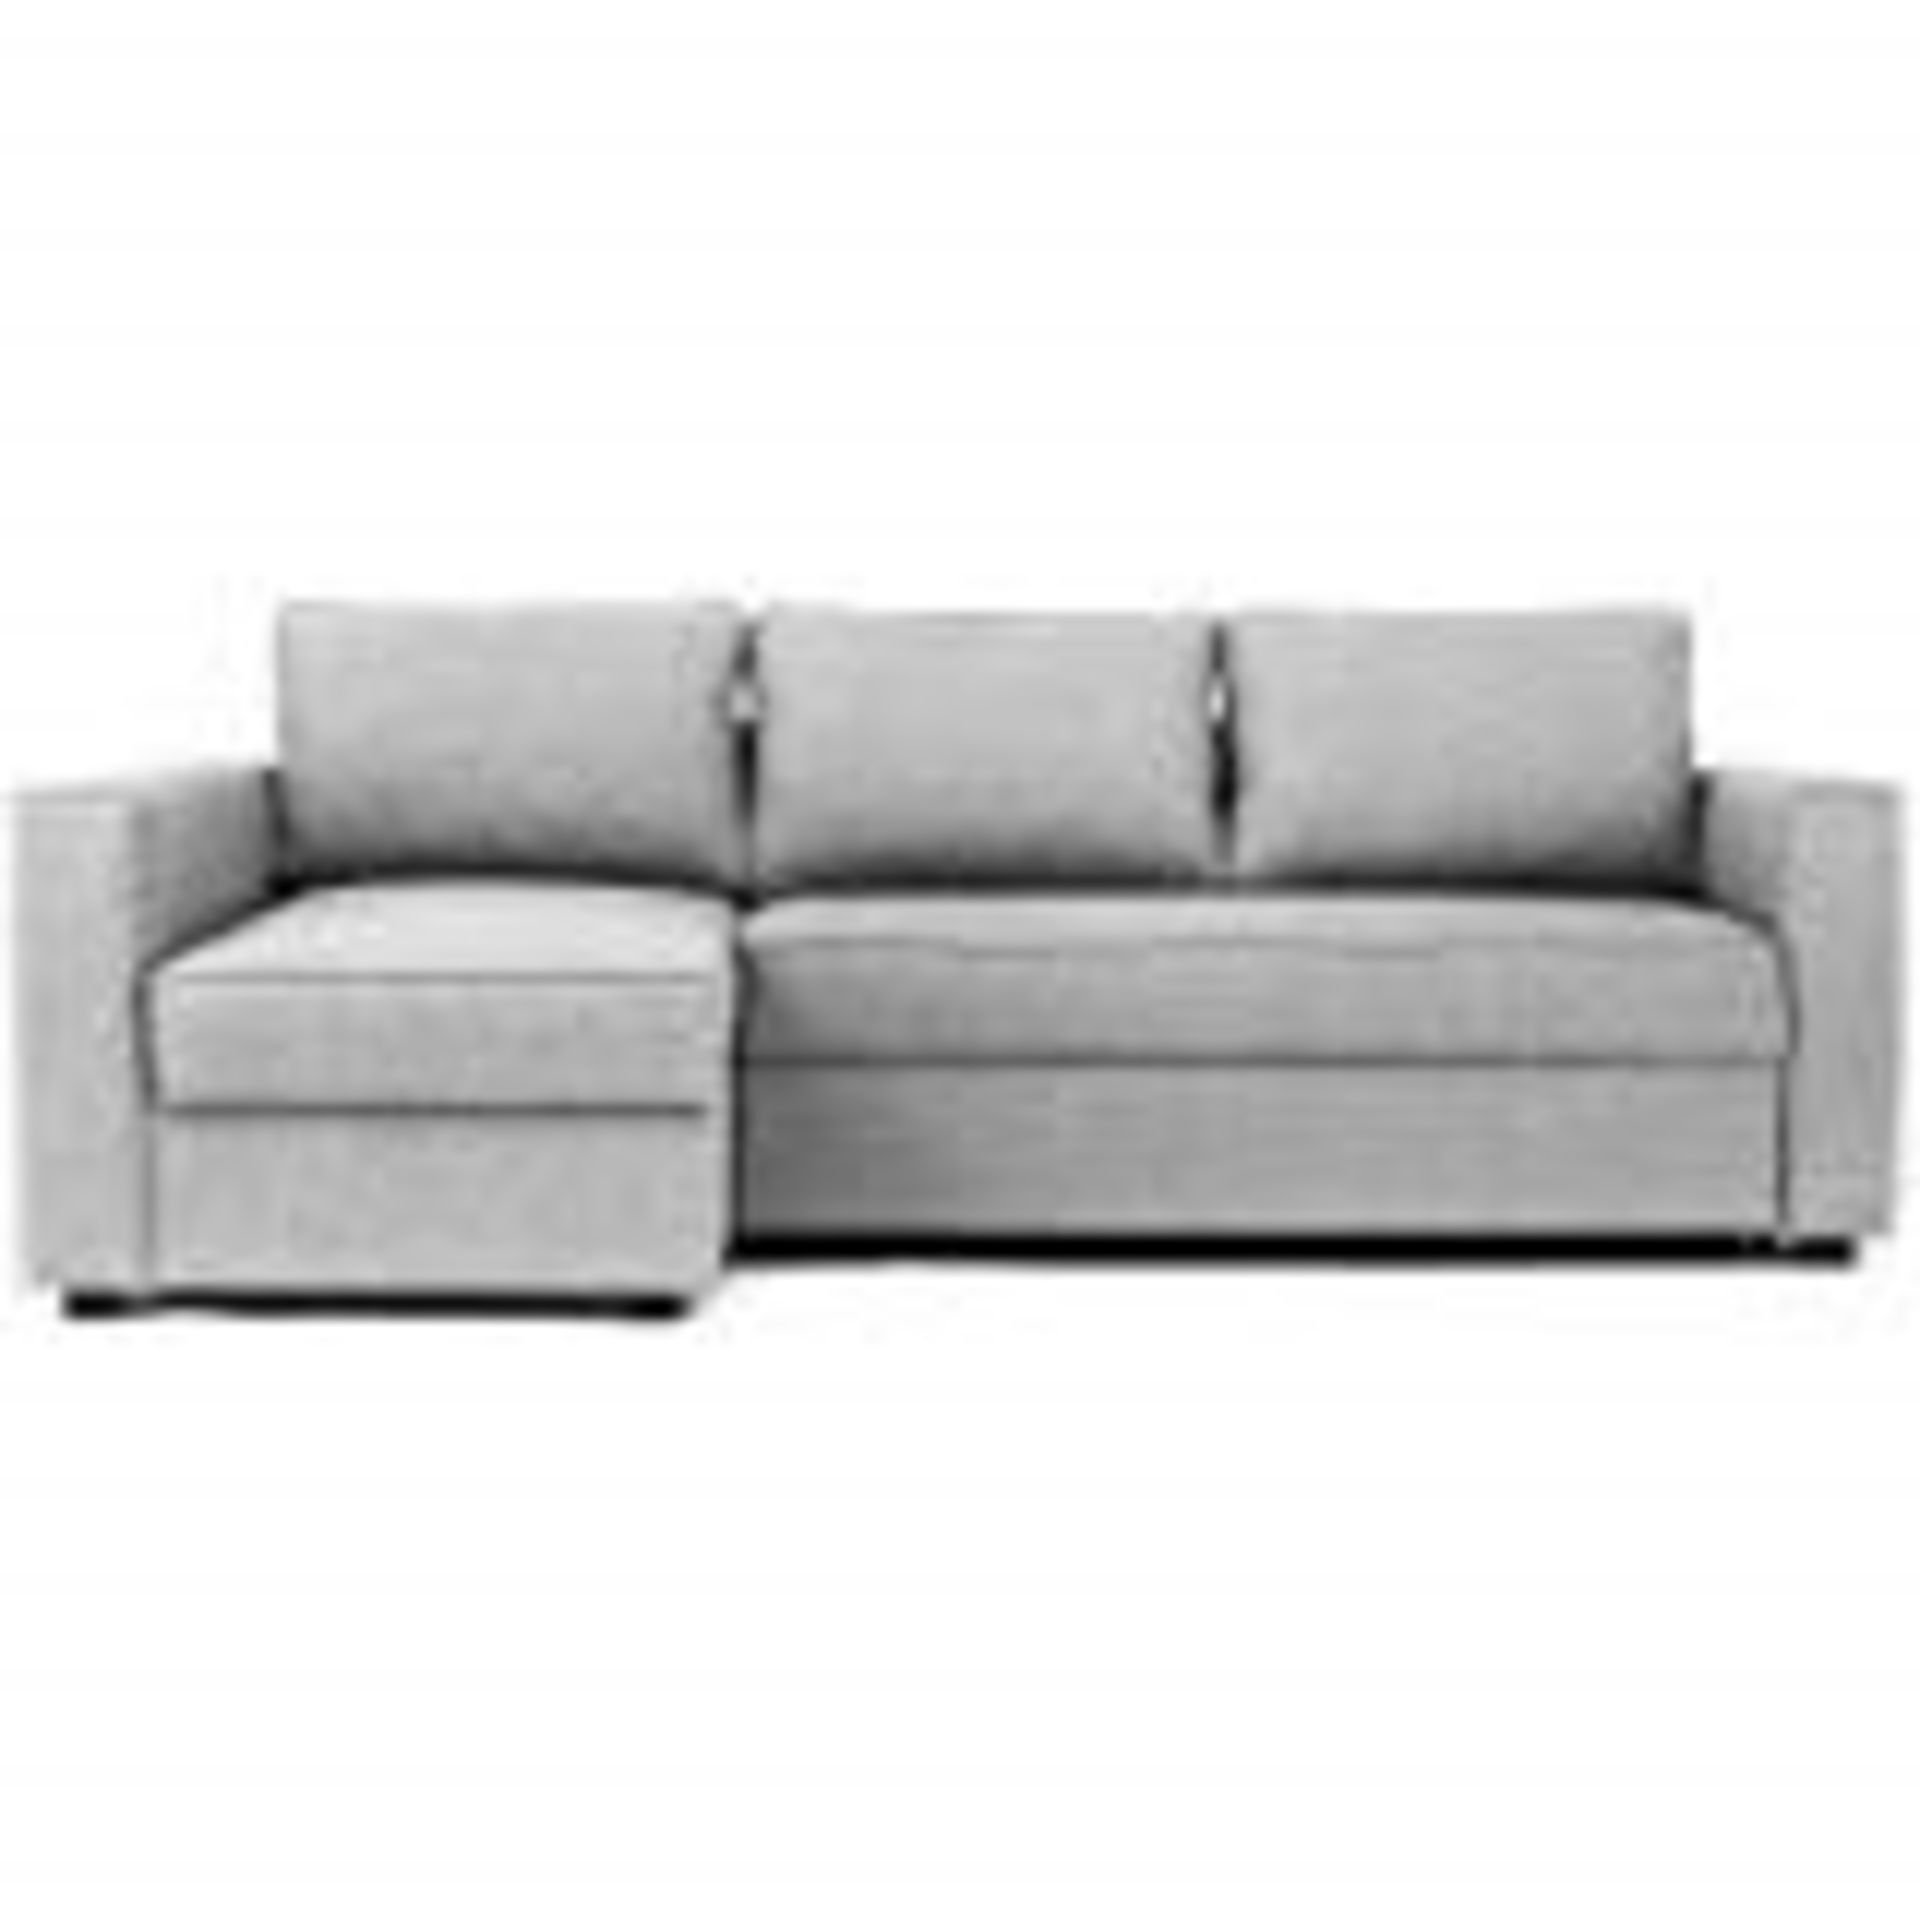 1 / BRAND NEW BAGGED BOSTON 2.5 SEATER SOFA IN LIGHT GREY (VIEWING HIGHLY RECOMMENDED)